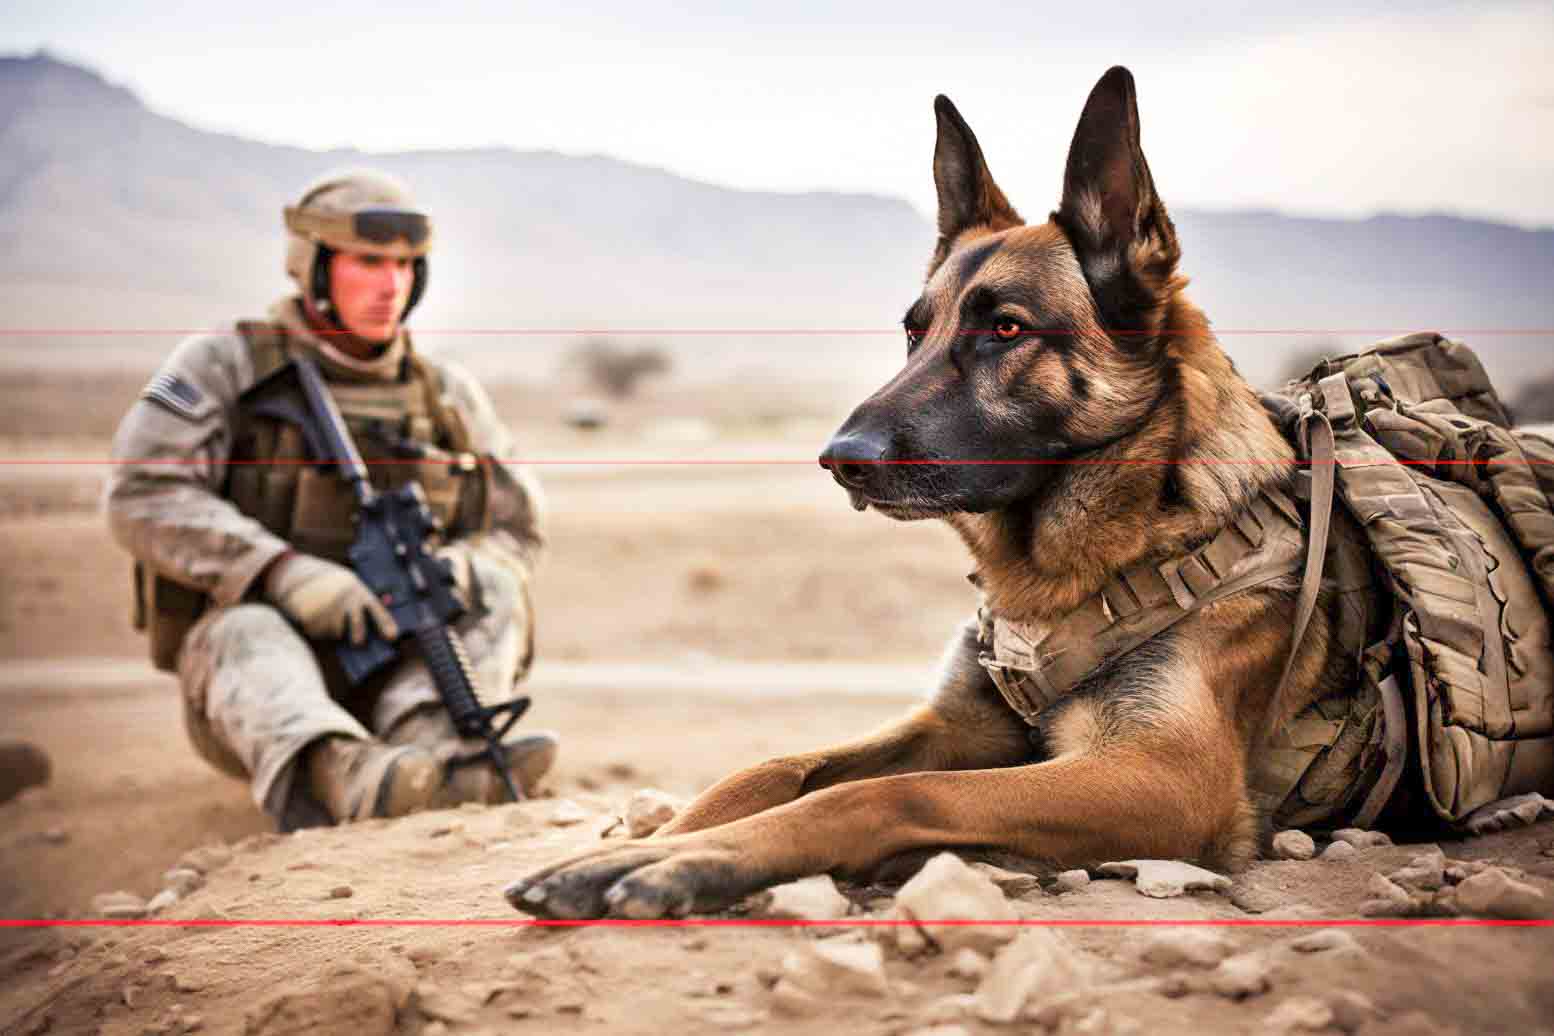 In this picture, a military working dog equipped with a tactical vest lies alert on sandy terrain. In the background, a soldier in camouflage gear and helmet, holding a rifle, sits on the ground. They are both in a desert landscape with mountains under a cloudy sky.